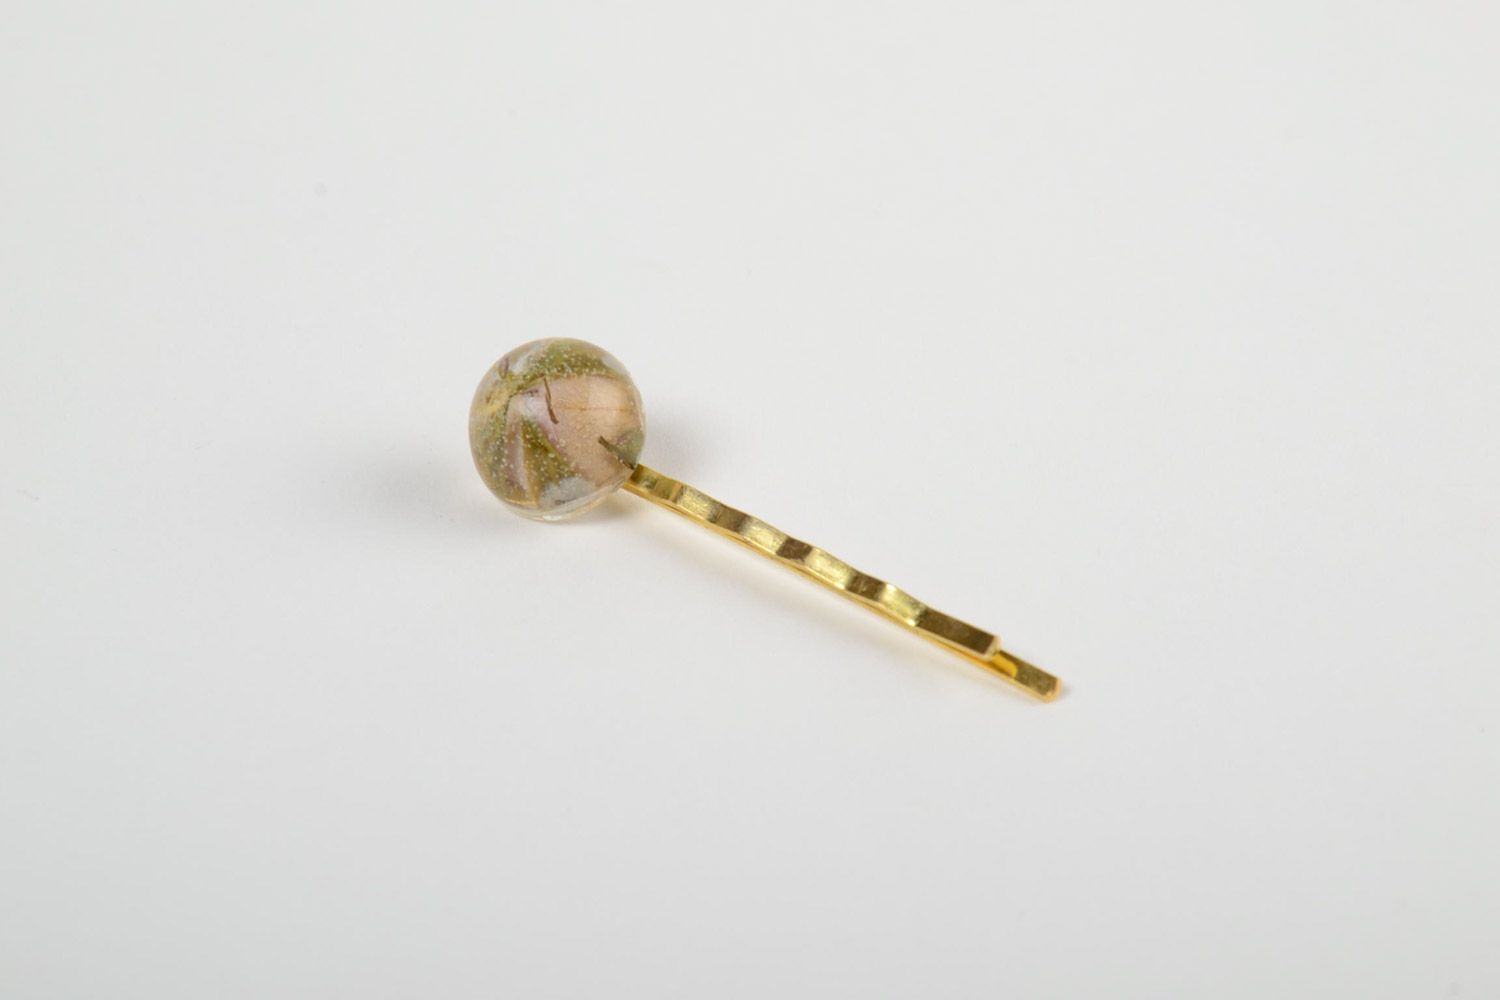 Handmade small hair clip with metal basis and natural plant in epoxy resin photo 3